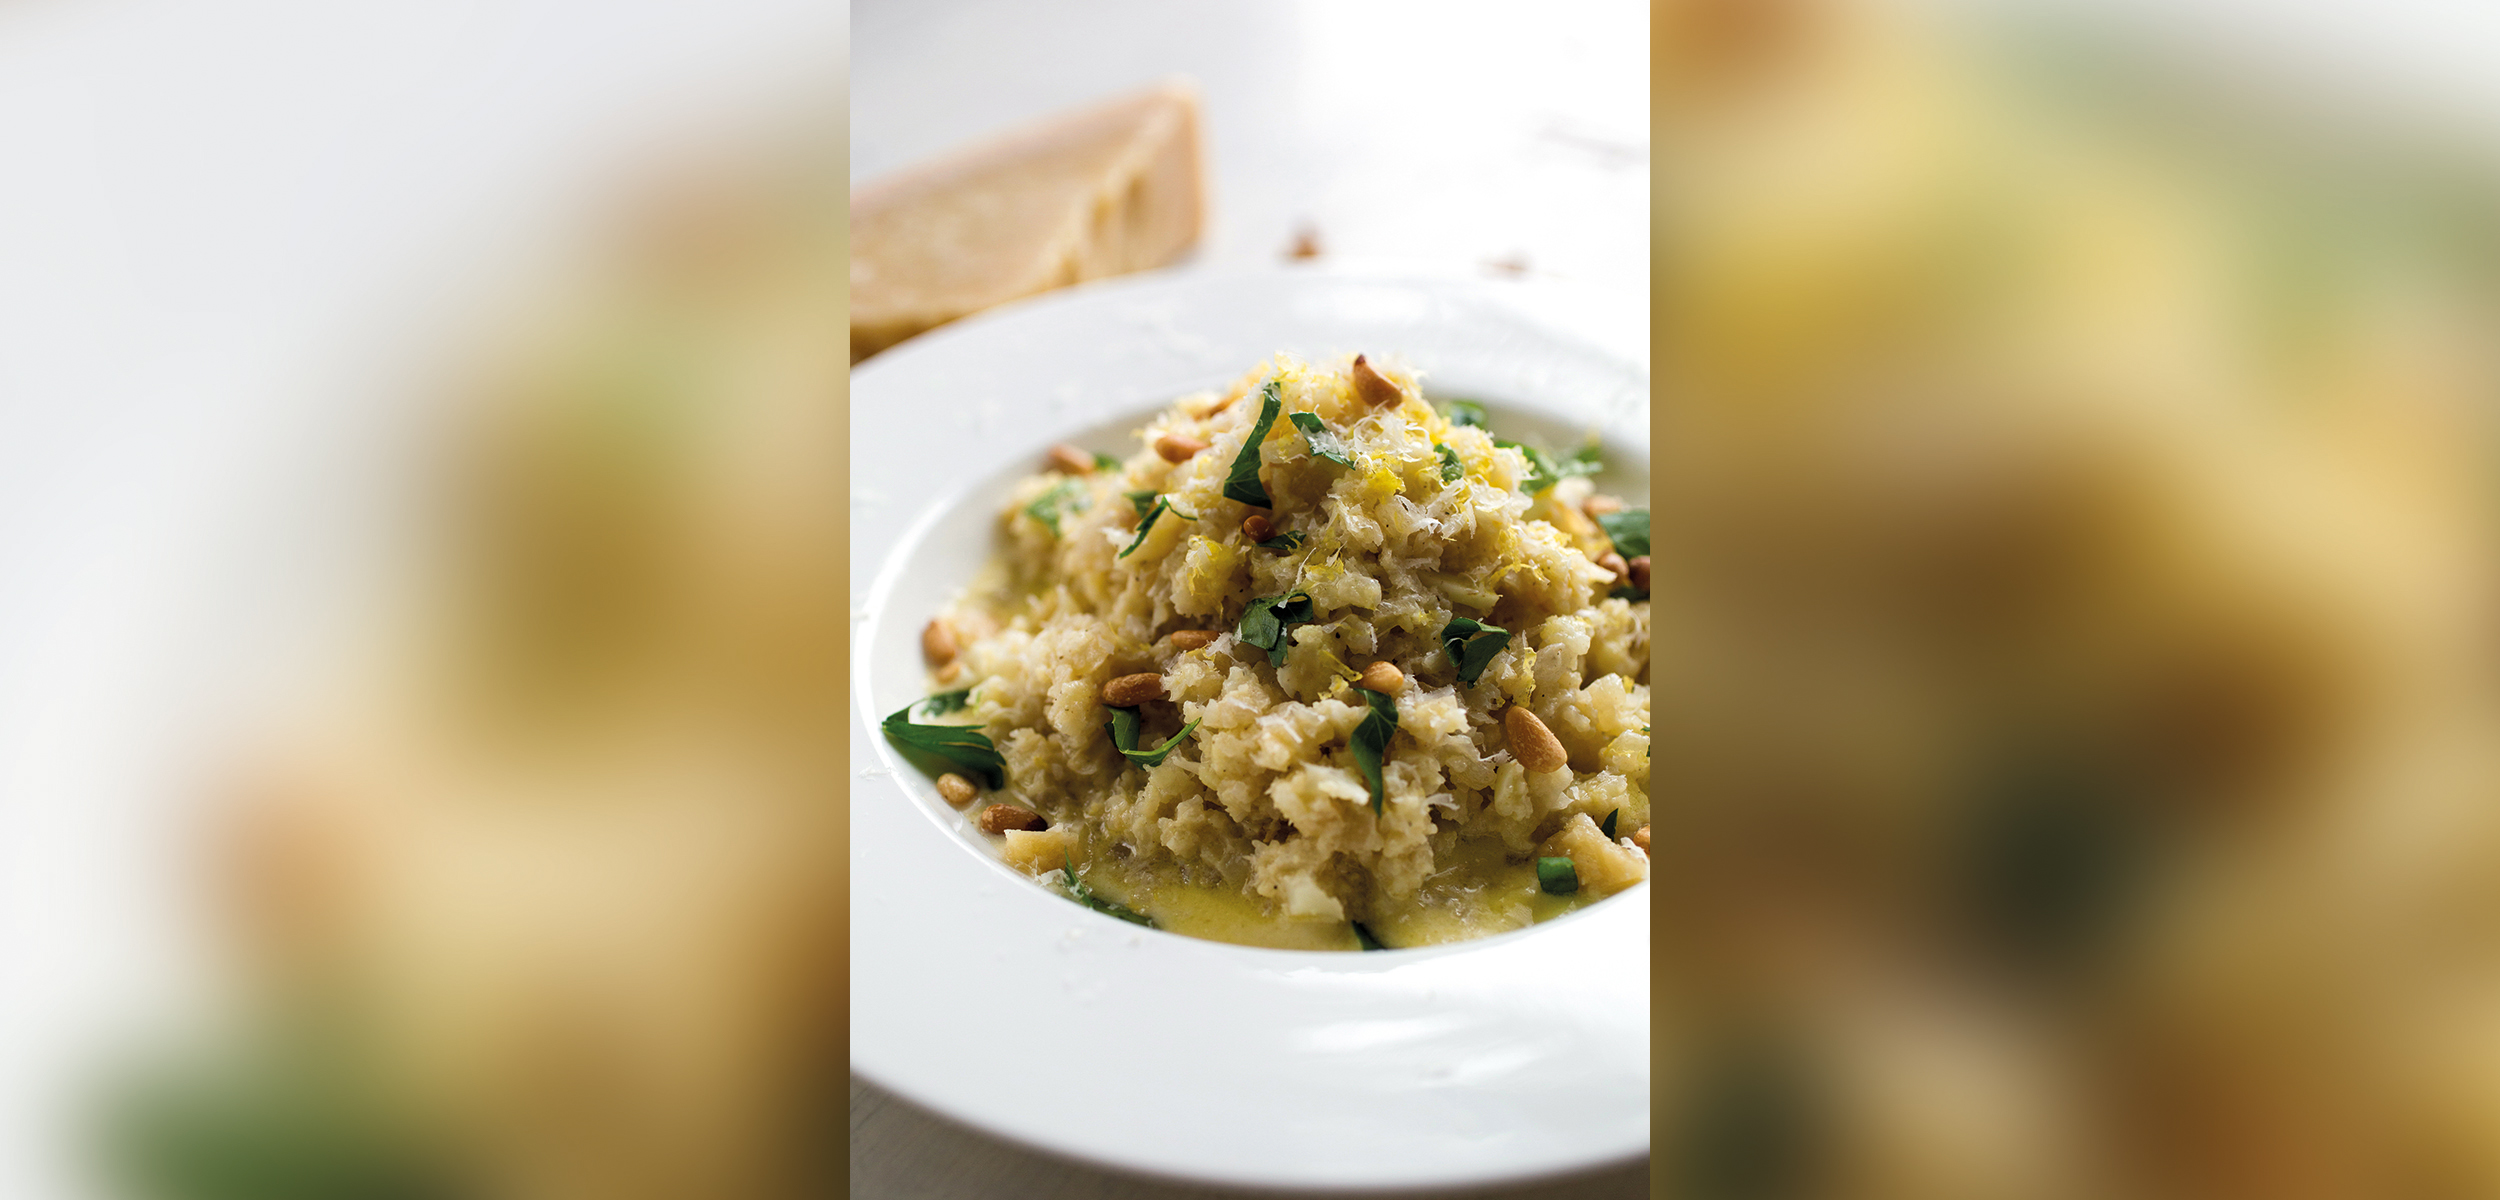 PHOTO: "The Chew" co-host Carla Hall's cauliflower "risotto" is photographed here.